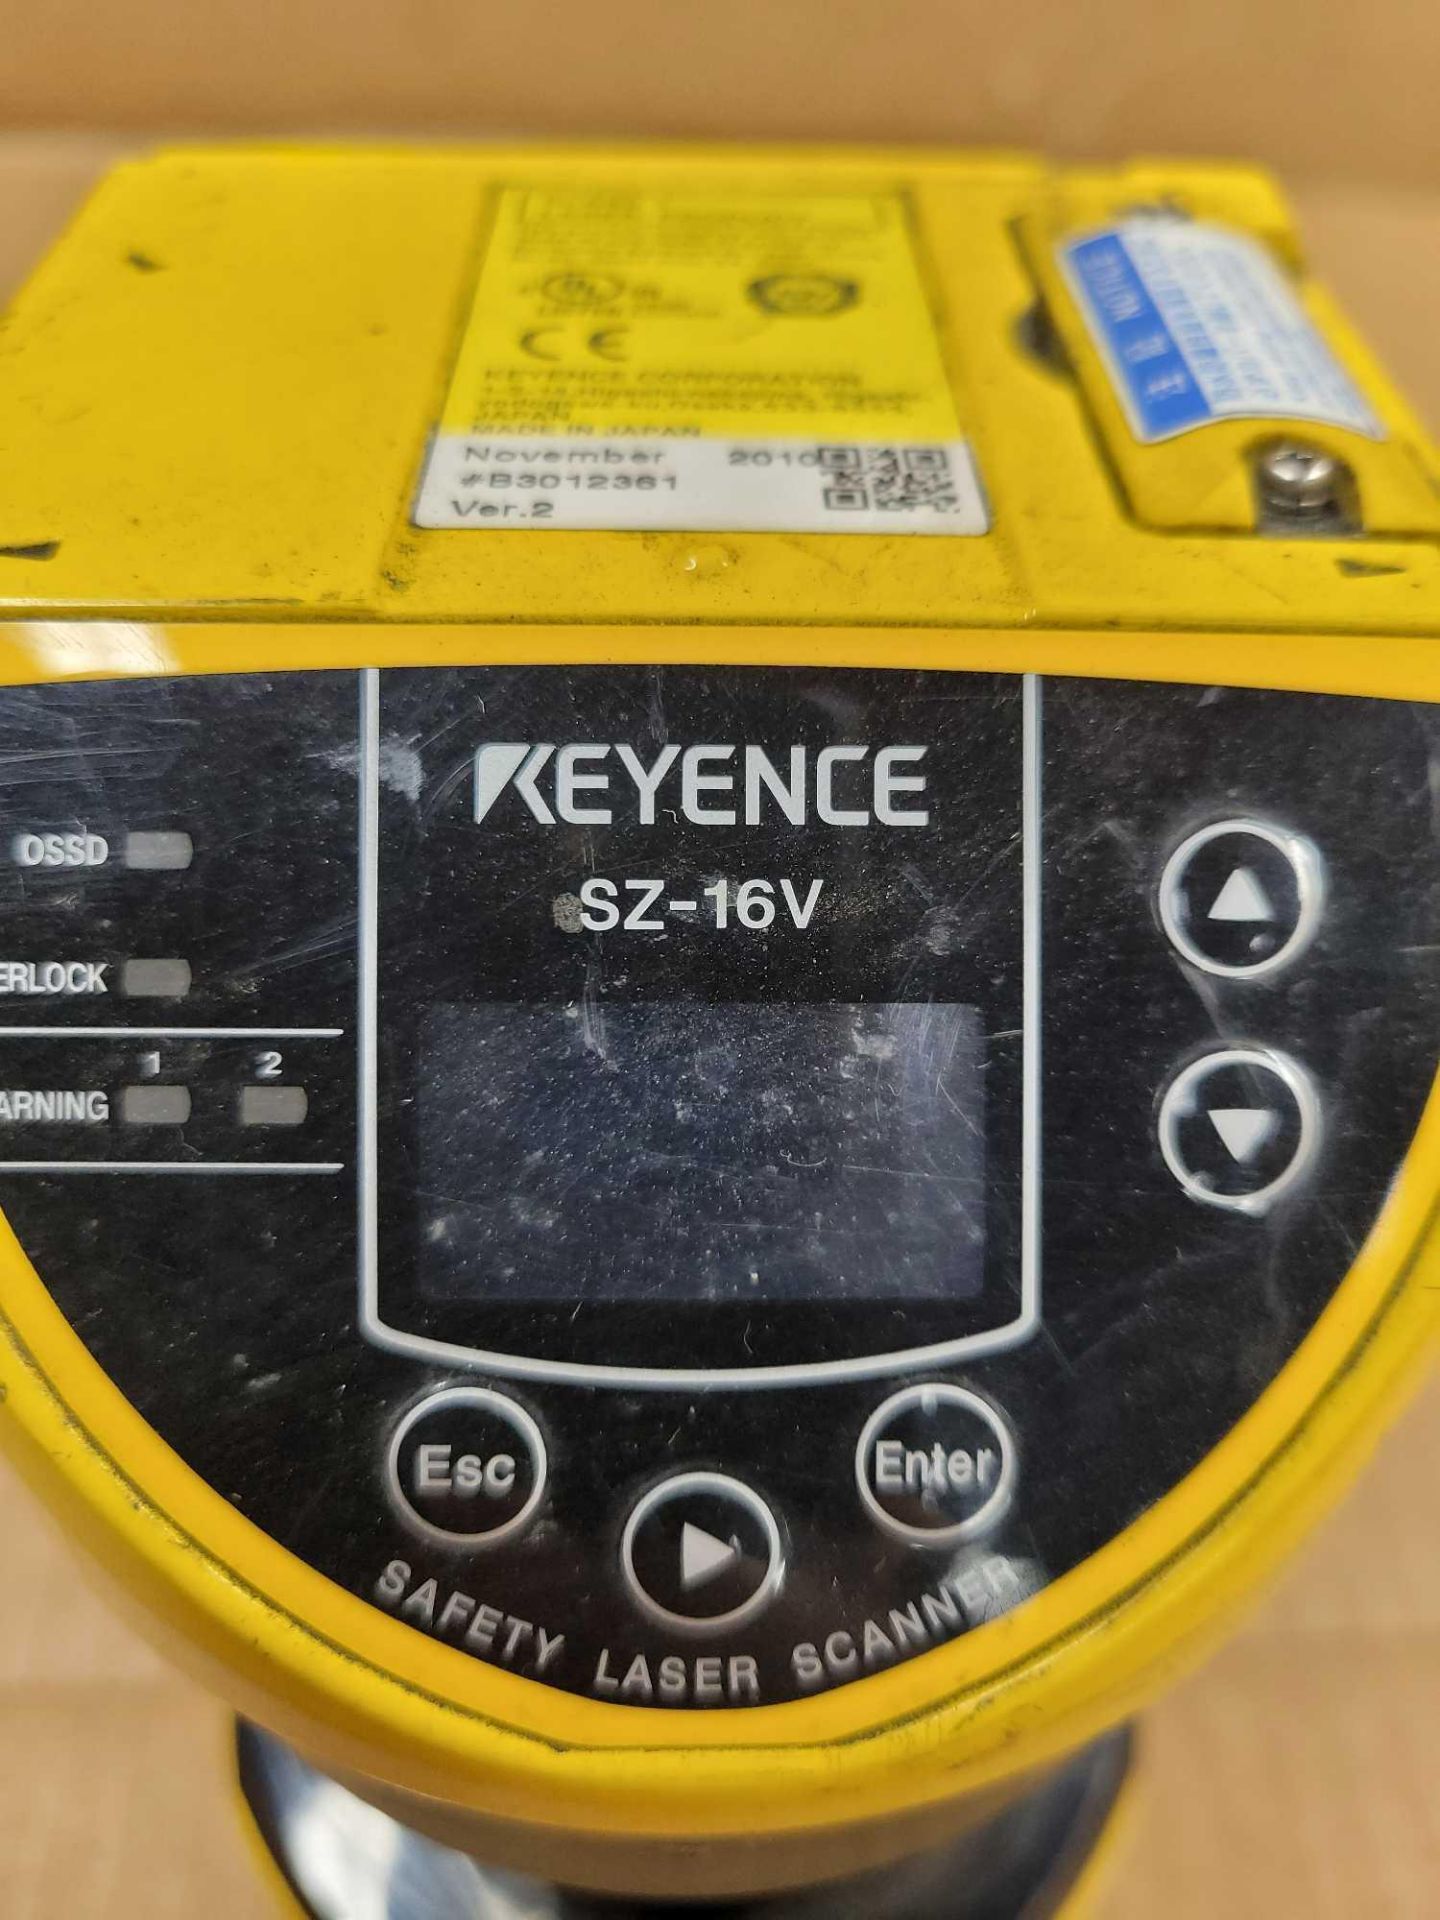 KEYENCE SZ-16V / Safety Laser Scanner  /  Lot Weight: 4.0 lbs - Image 8 of 8